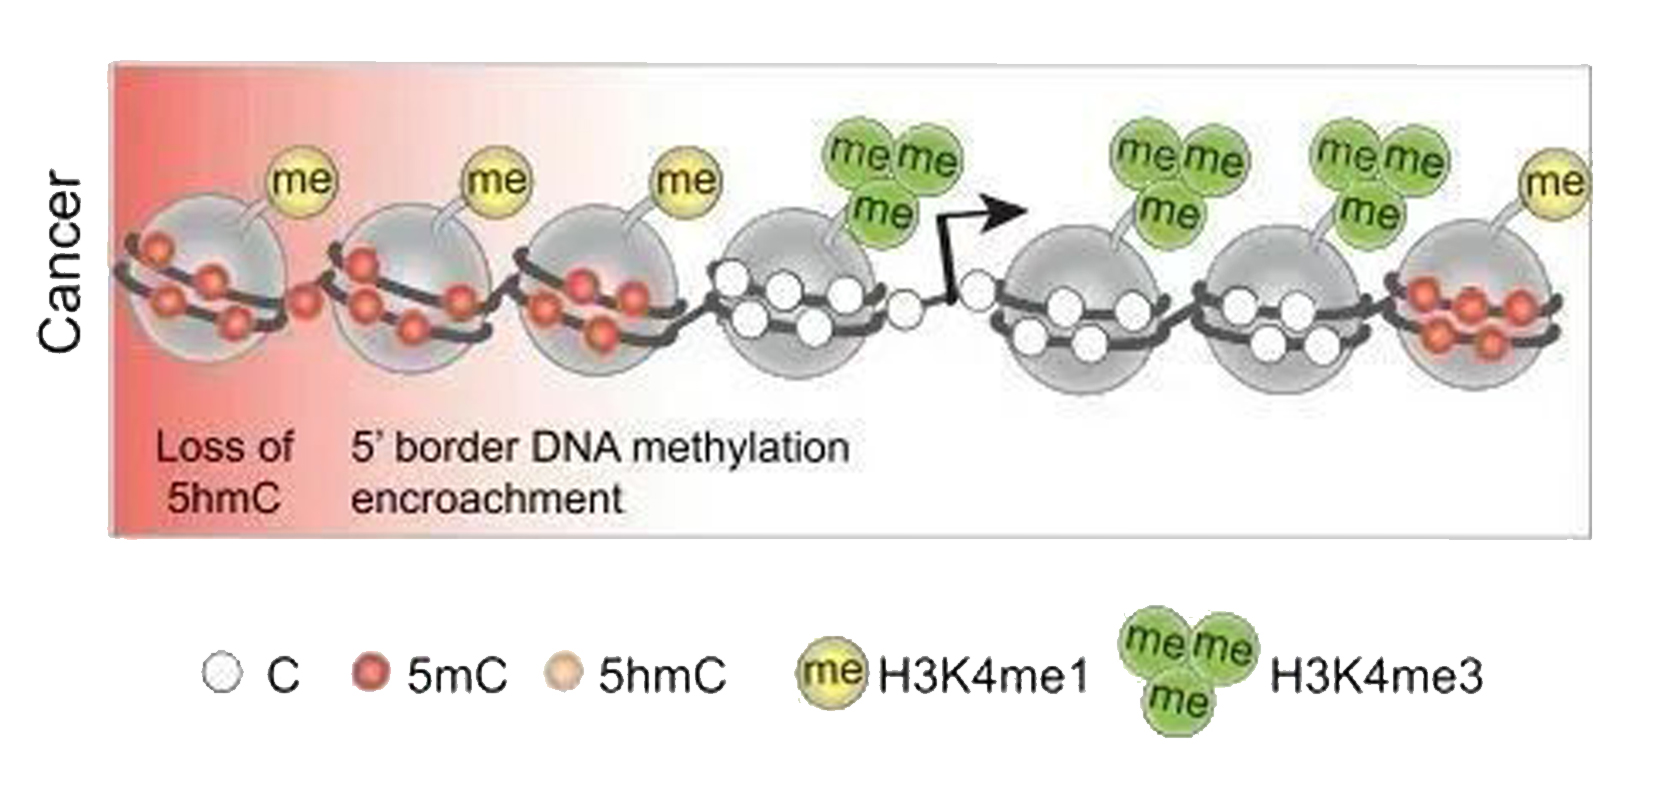 Cancer Cell｜Research on Whole Genome Methylation of Cancer